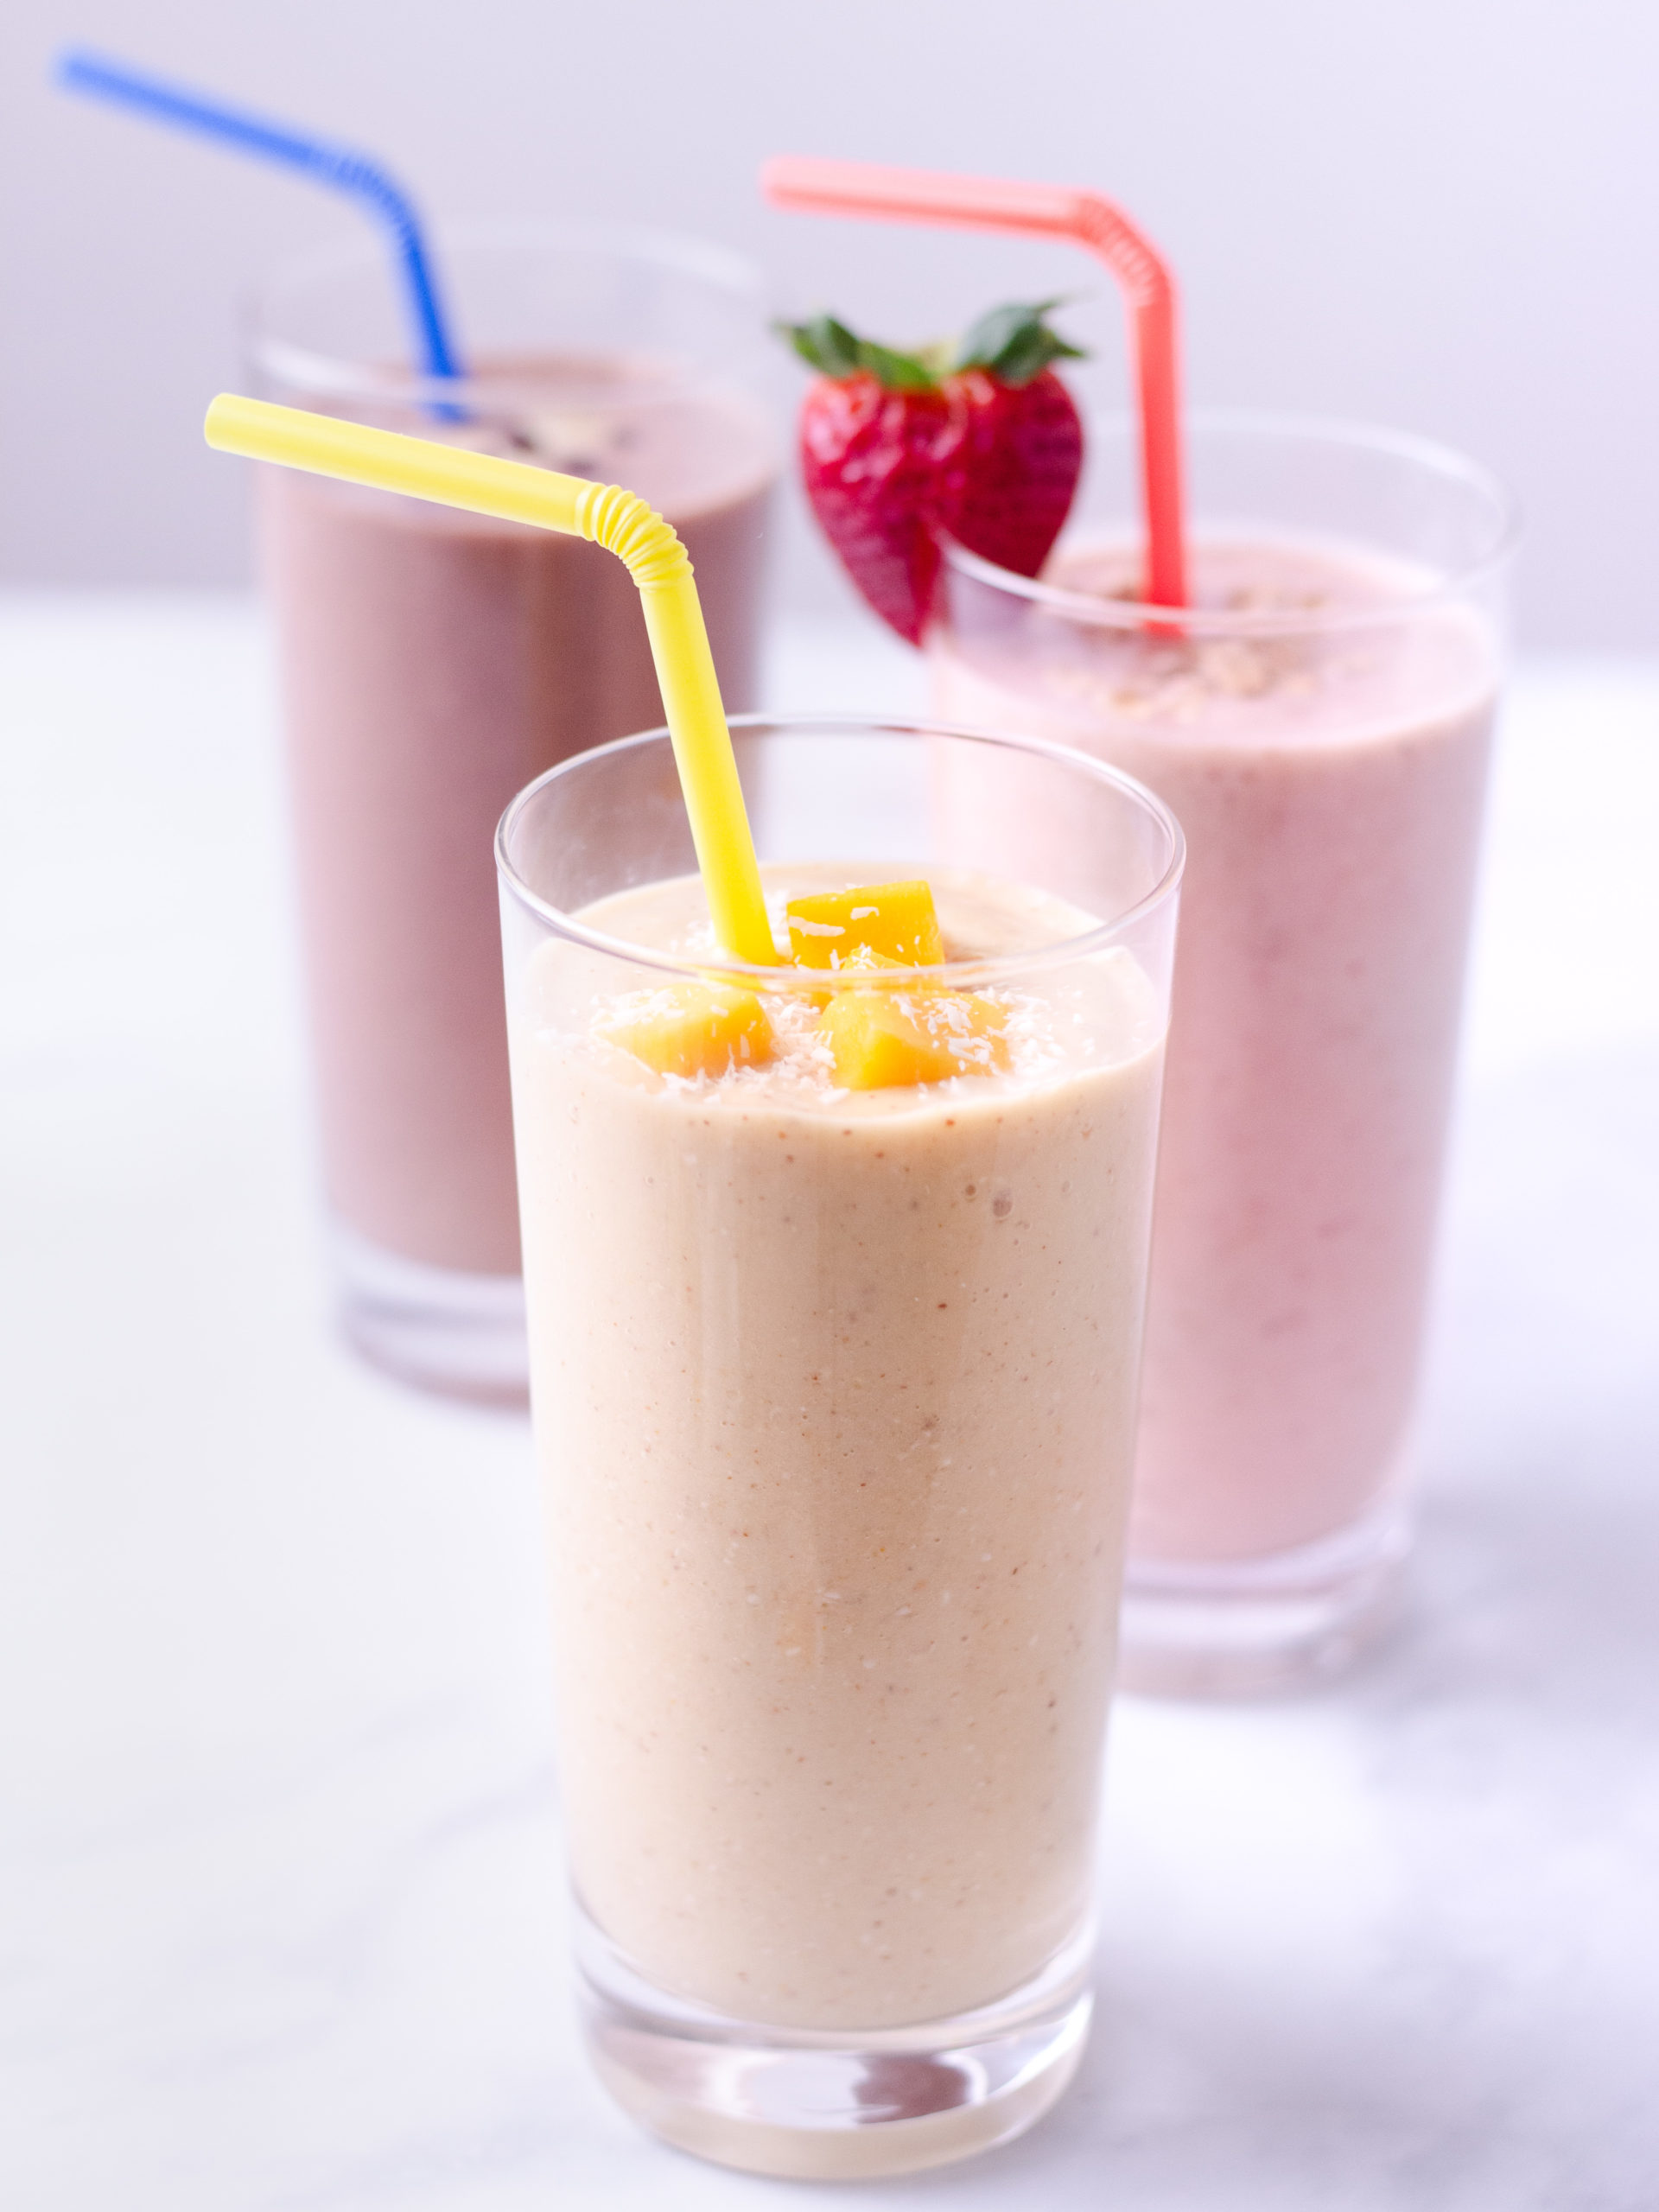 Three oat smoothies, including strawberry banana, turmeric mango and chocolate peanut butter straight on in glasses with straws on a marble surface.